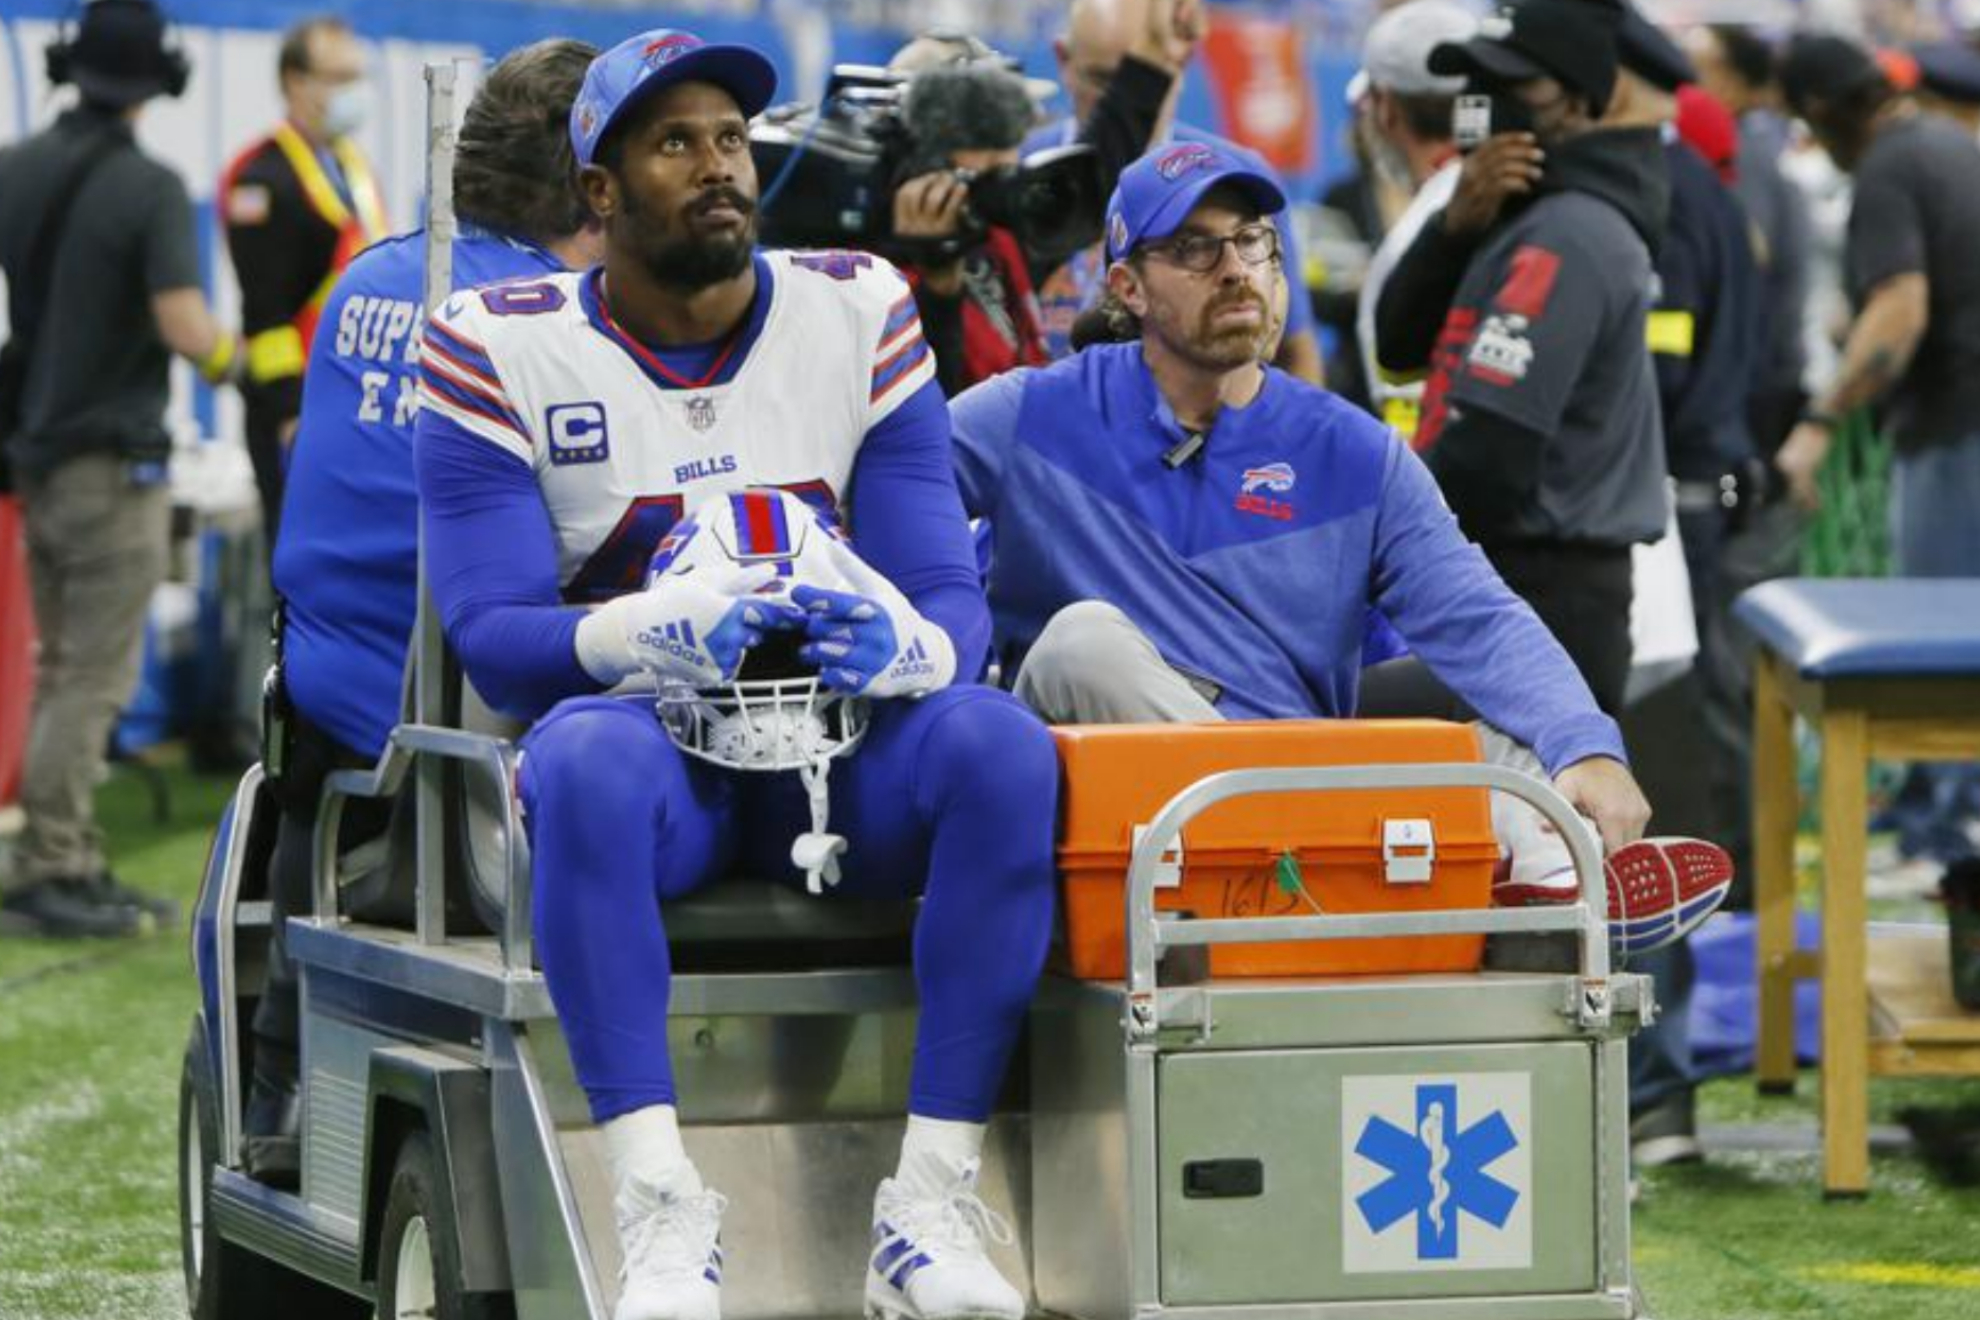 Von Miller was carted off the sidelines to the locker room during the game against the Lions.